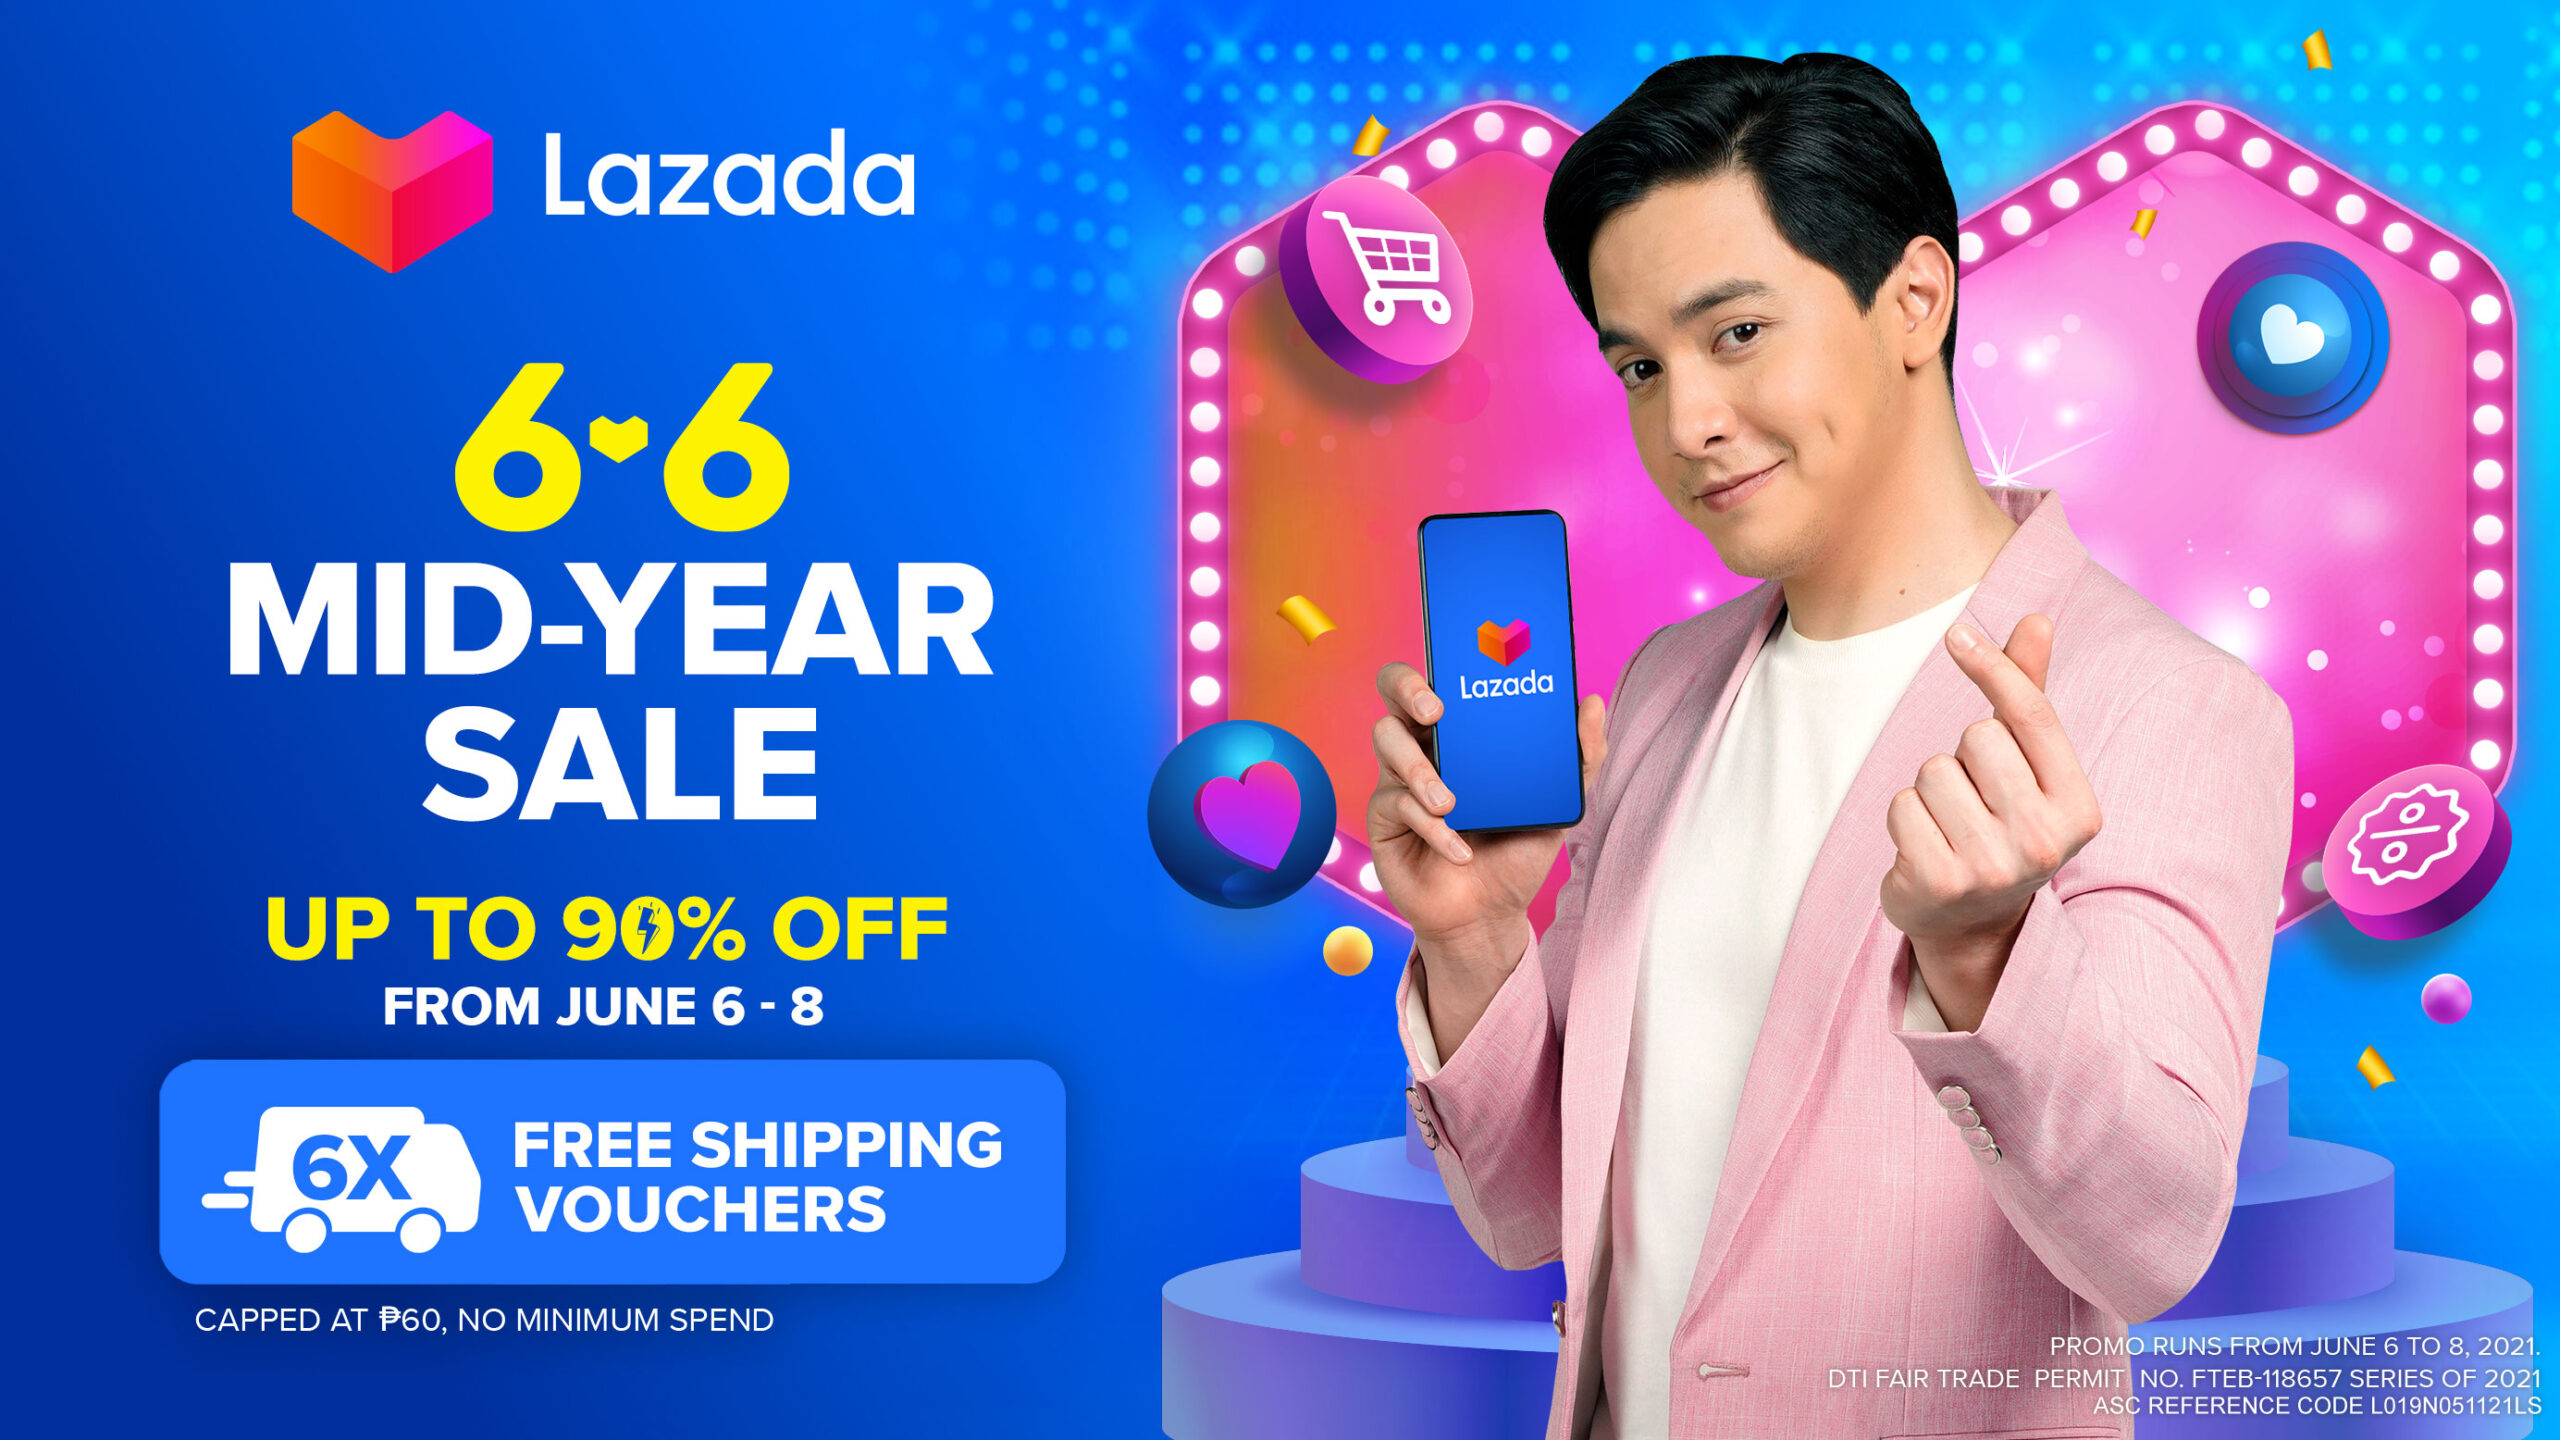 Lazada celebrates the mid-year with a new brand ambassador